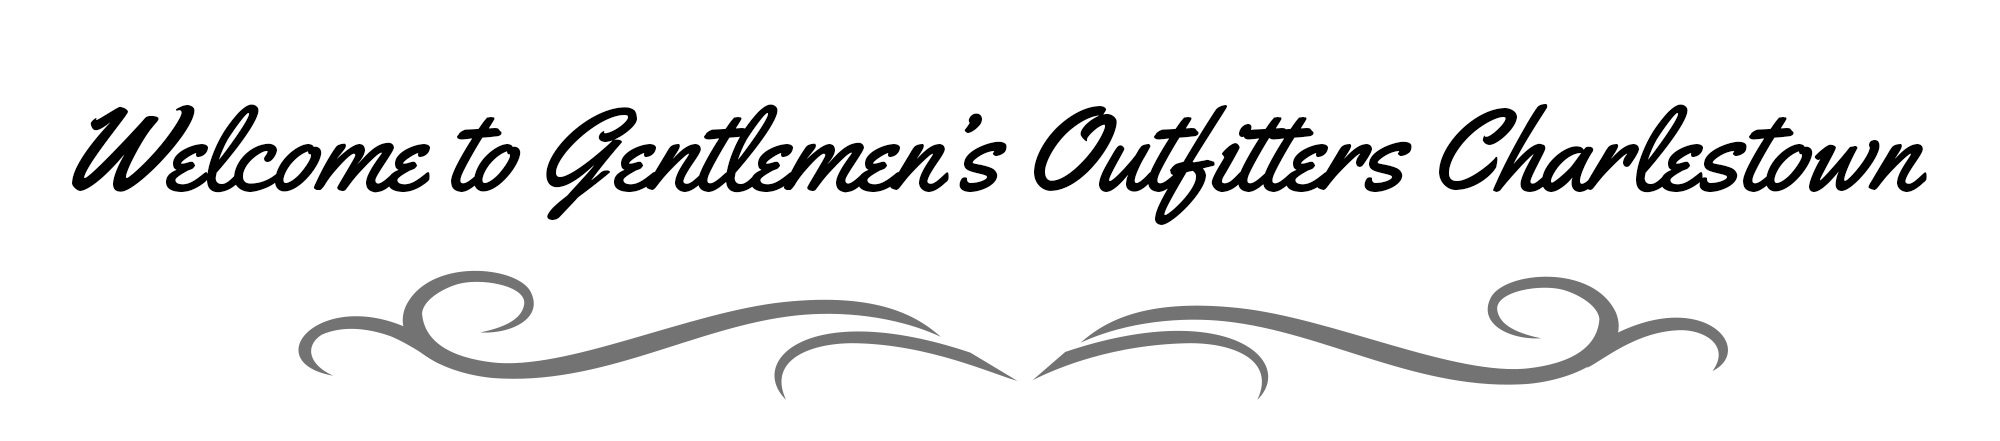 welcome to Gentlemen's Outfitters Charlestown